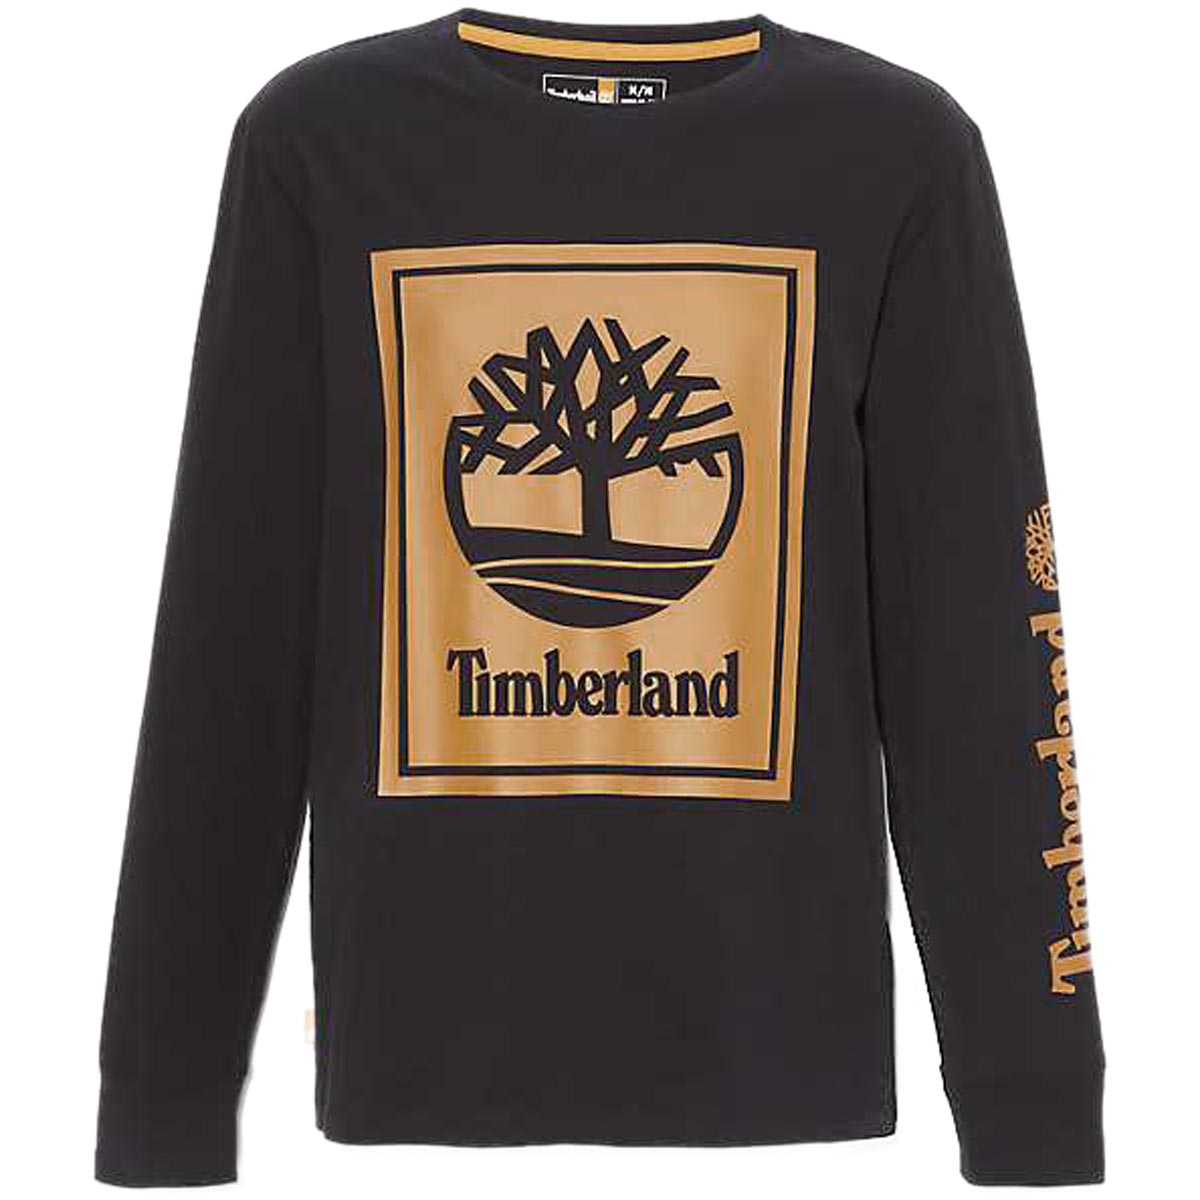 Timberland Front Stack Logo Long Sleeve T-Shirt - Black/Wheat Boot image 1